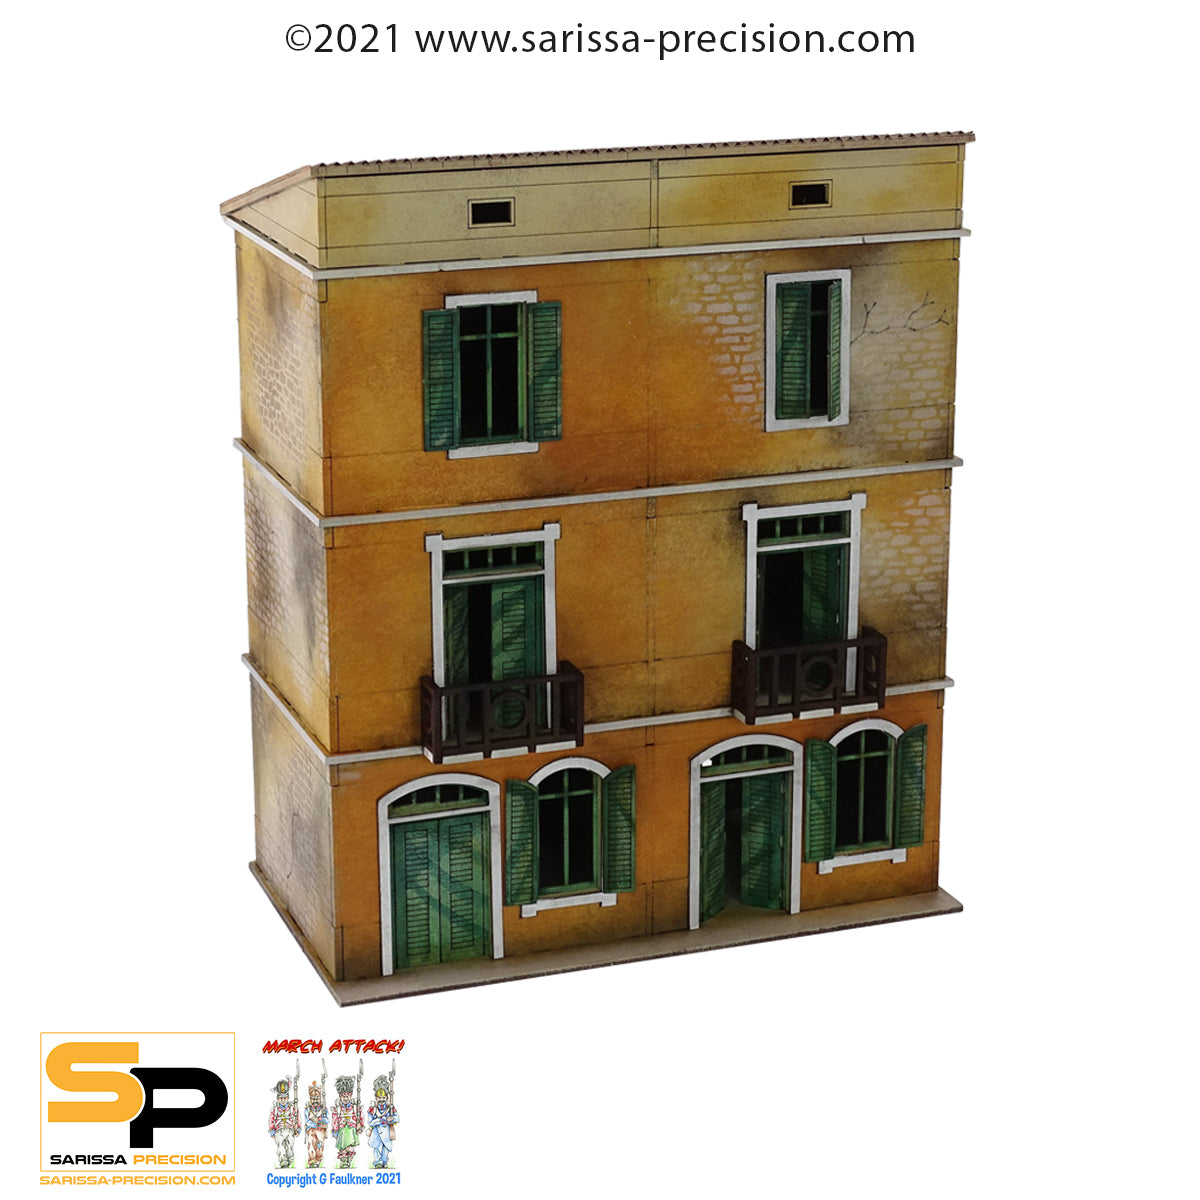 Mediterranean Semi House - 3 Floors with Balcony and Sloped Roof